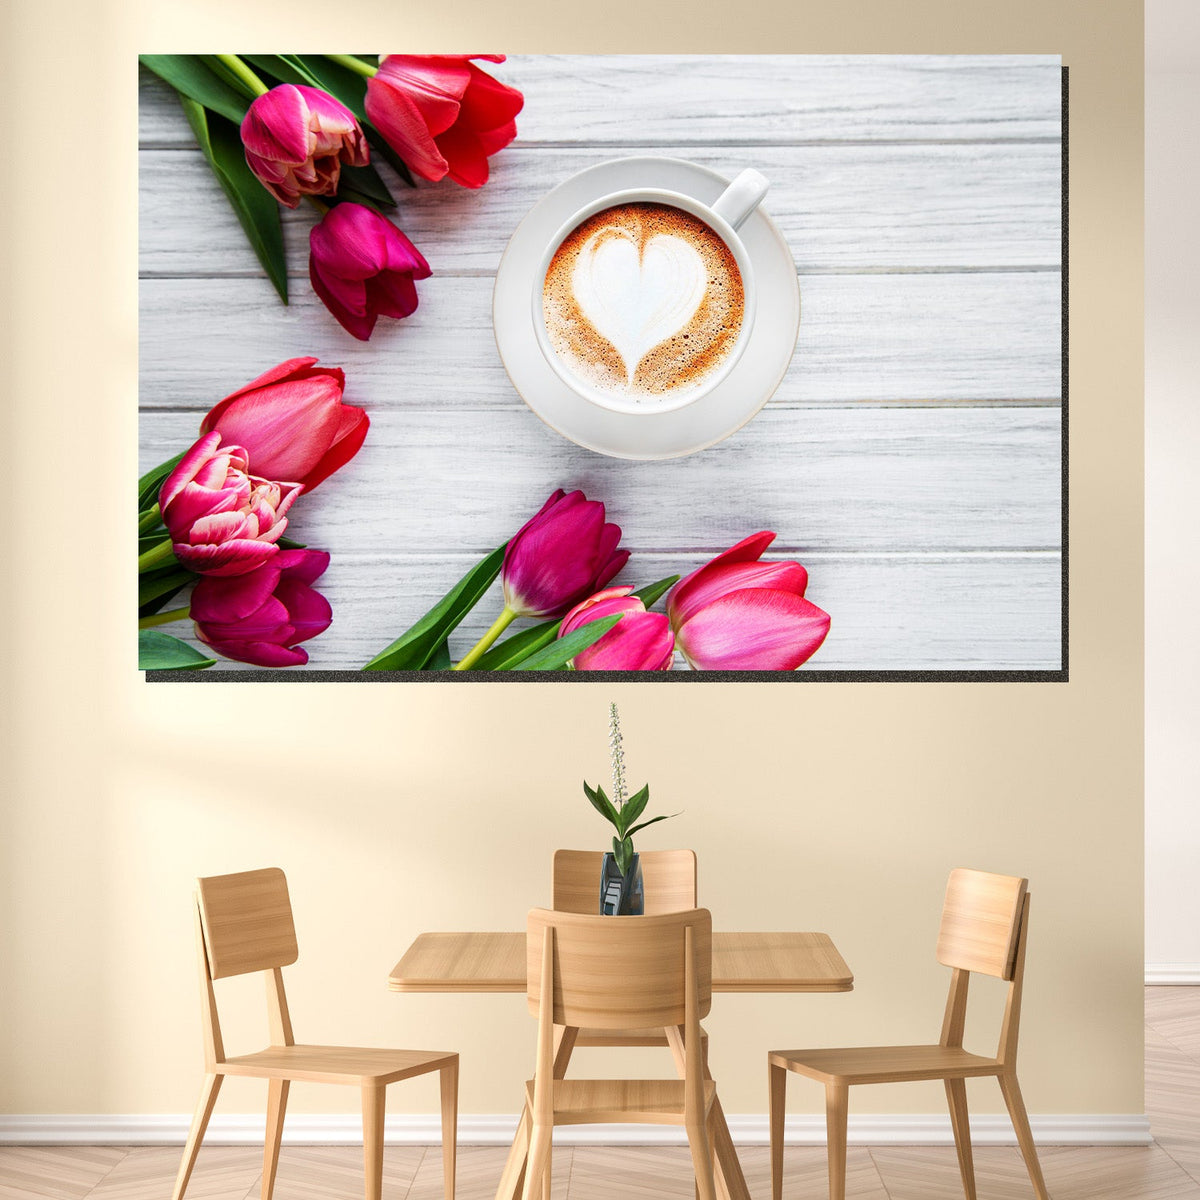 https://cdn.shopify.com/s/files/1/0387/9986/8044/products/CoffeeandTulipsCanvasArtprintStretched-1.jpg